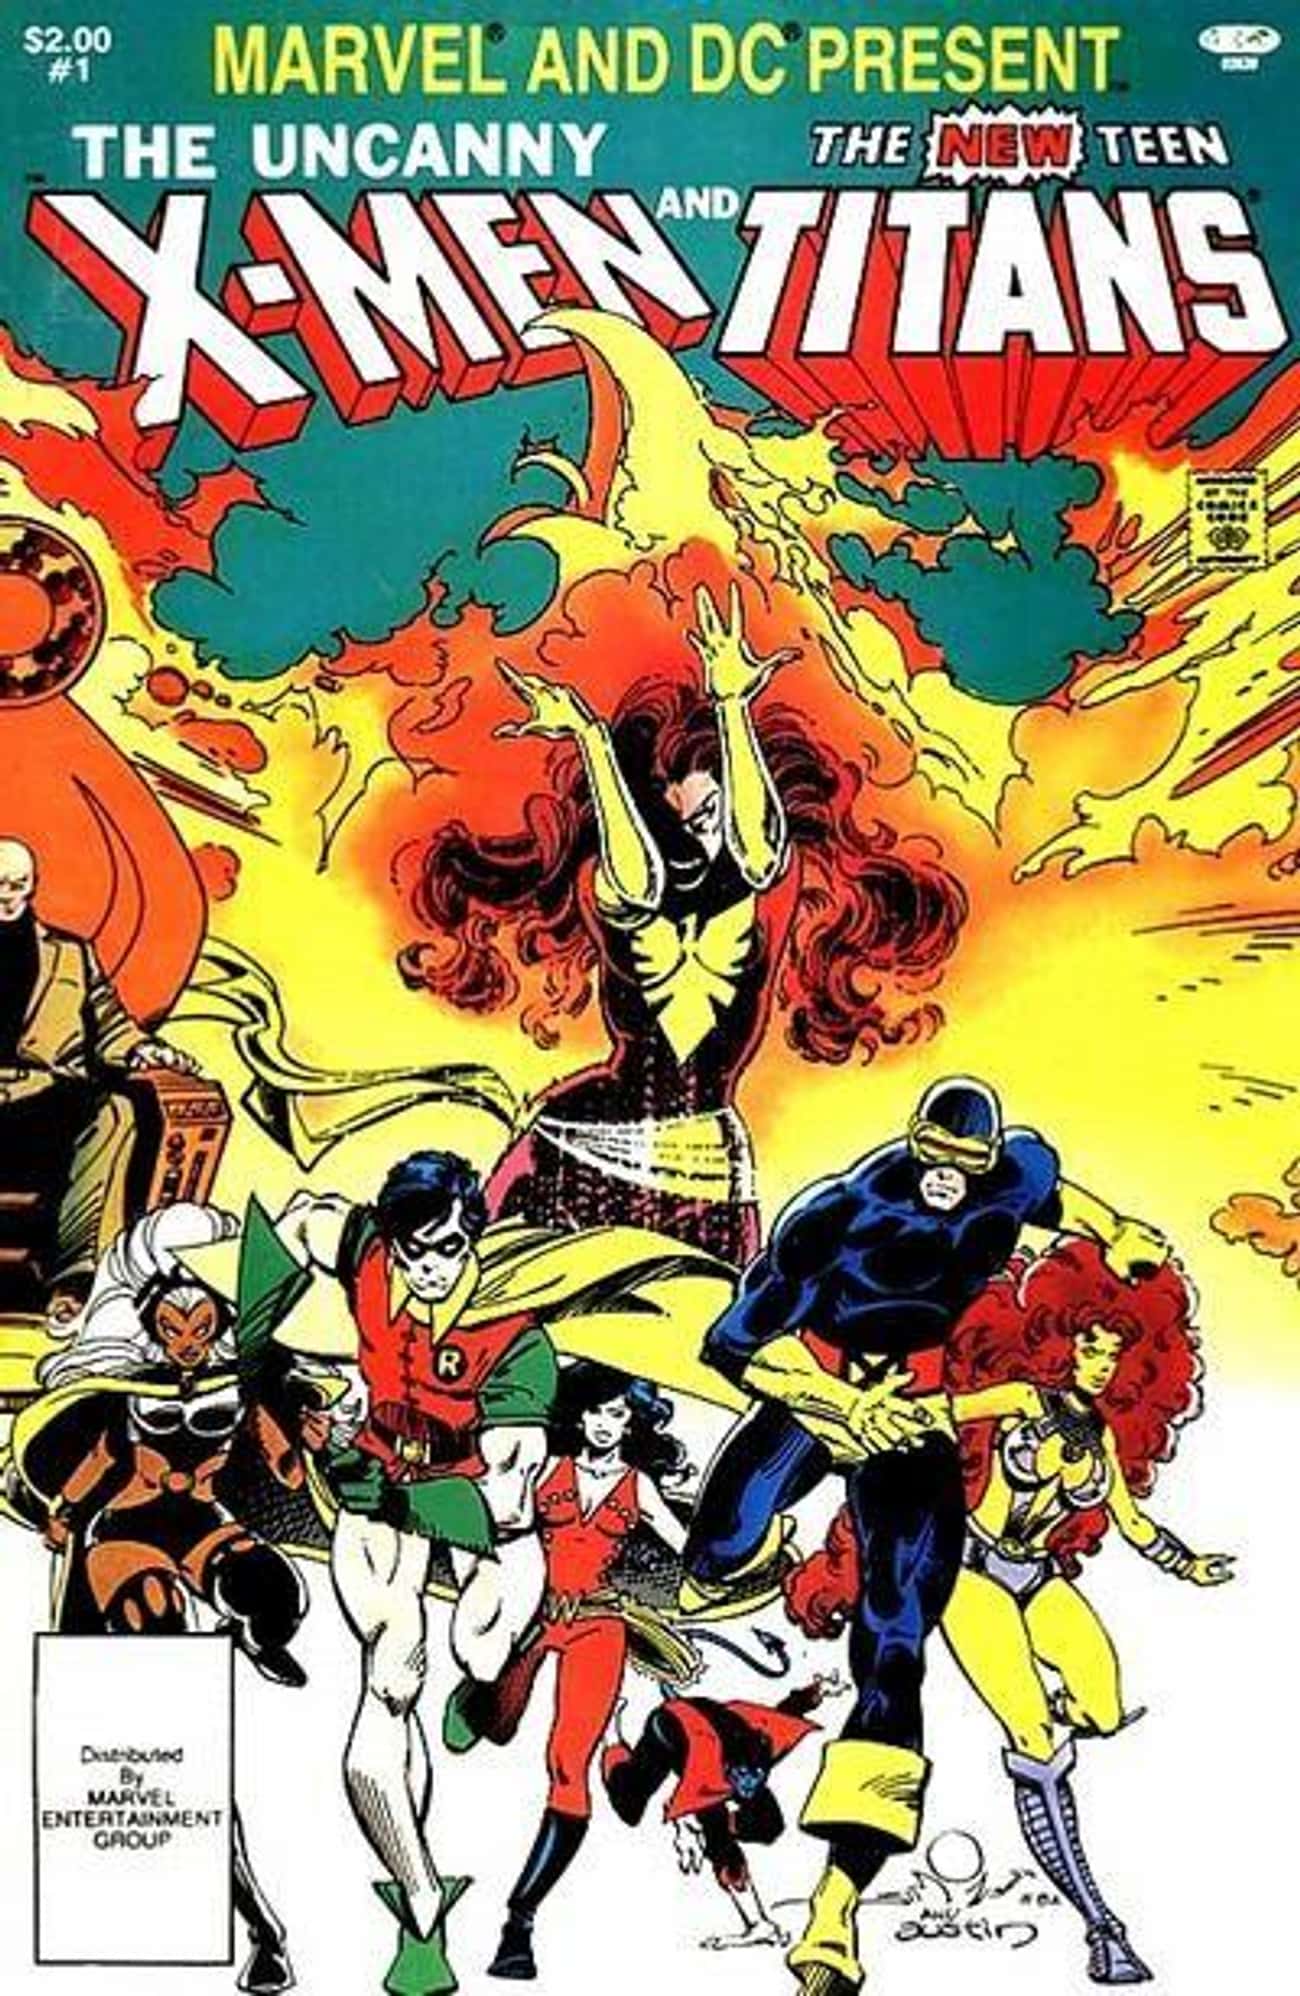 ‘Marvel and DC Present Featuring The Uncanny X-Men And The New Teen Titans #1’ (1982)